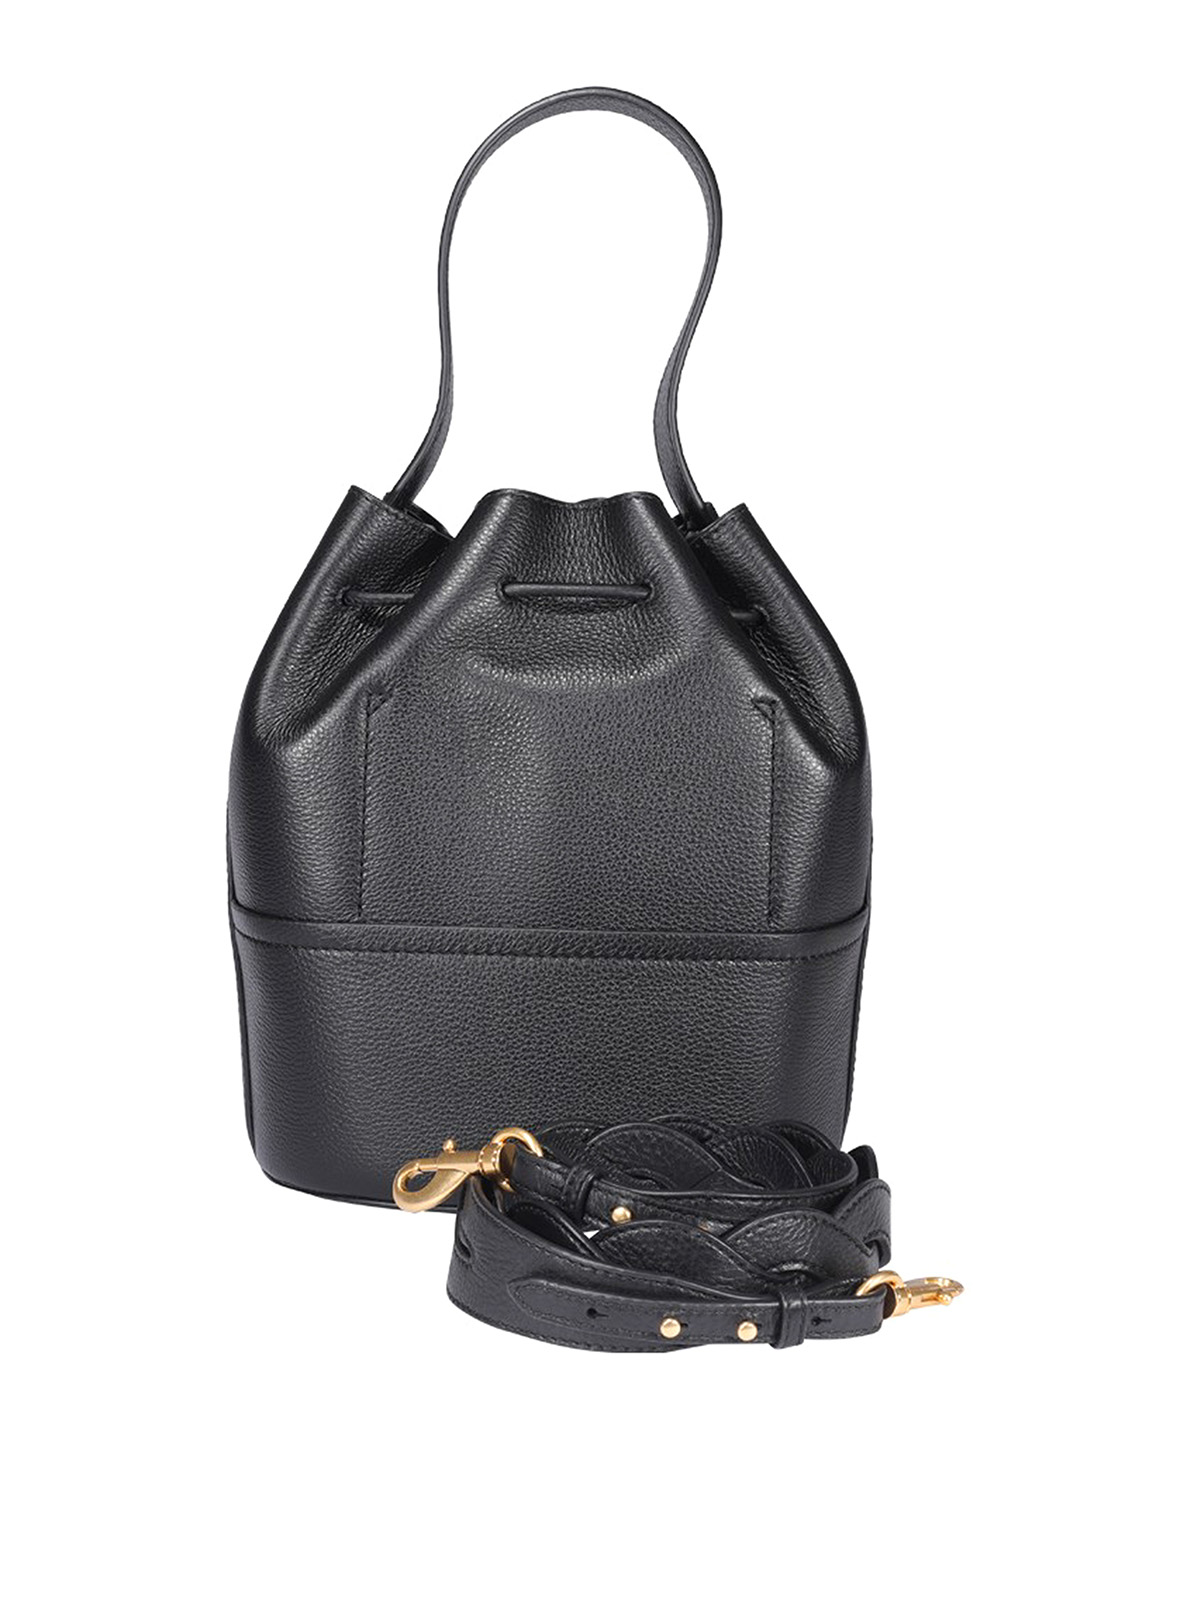 Small bucket bag in pebbled patent leather